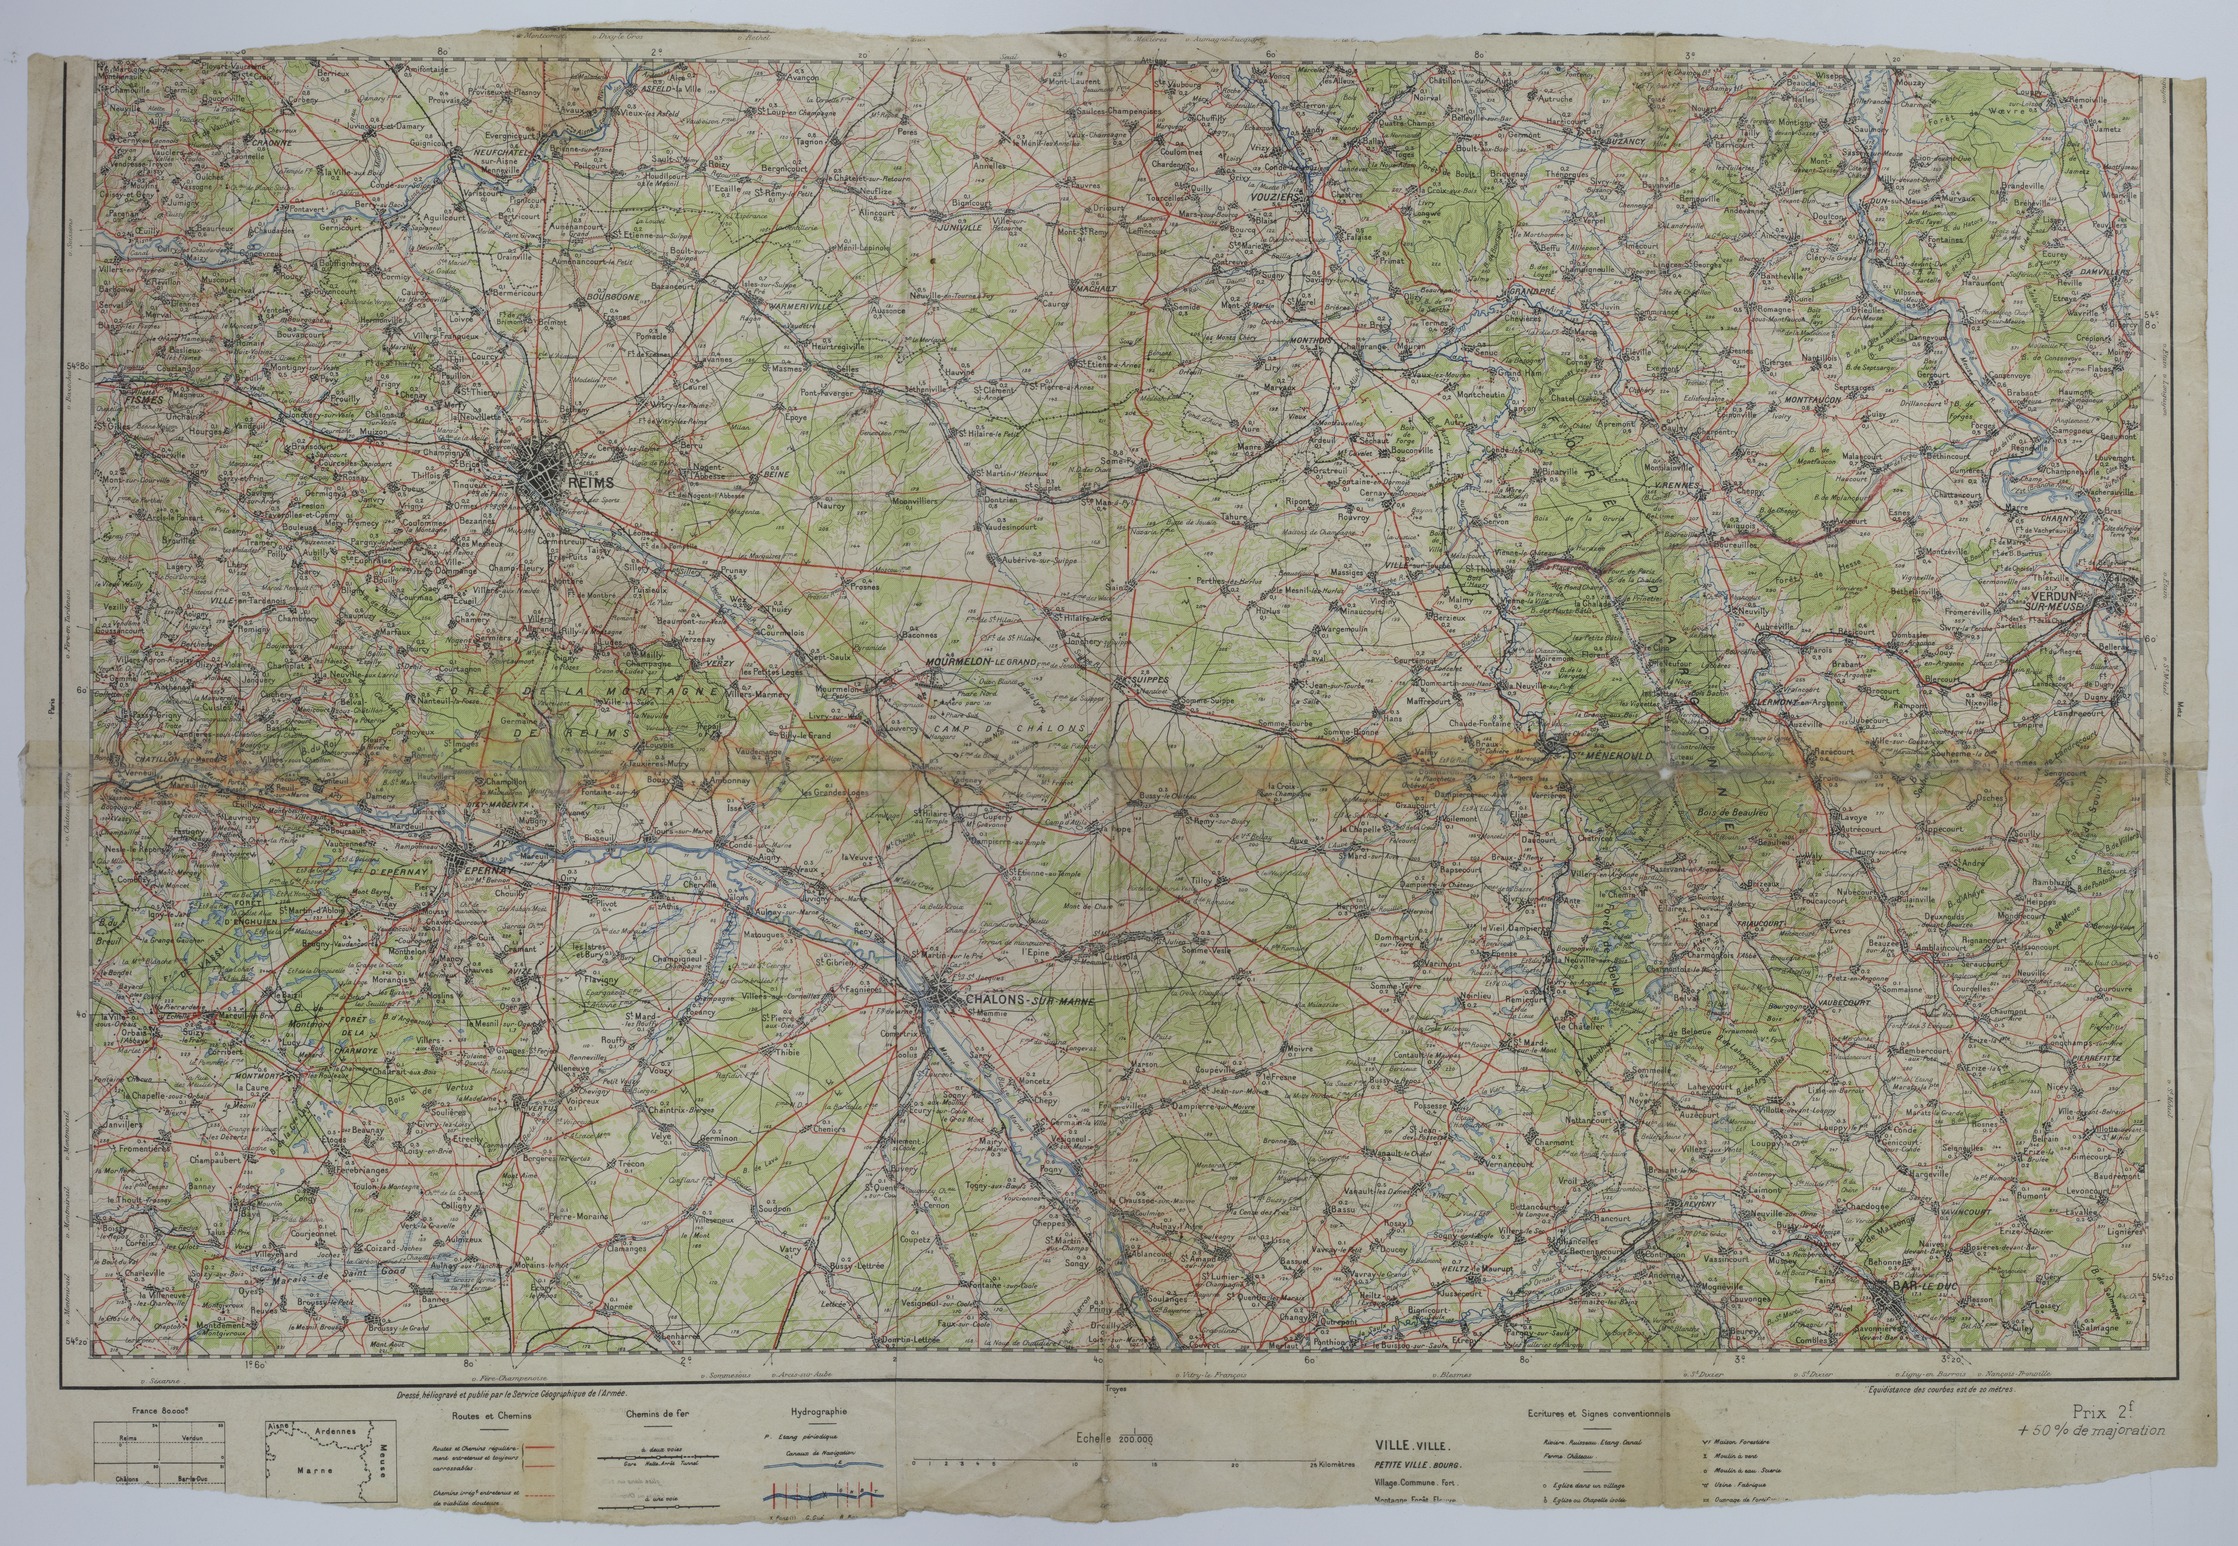 Map of the Area Surrounding Reims, Chalons, Verdun, and Bar-le-Duc